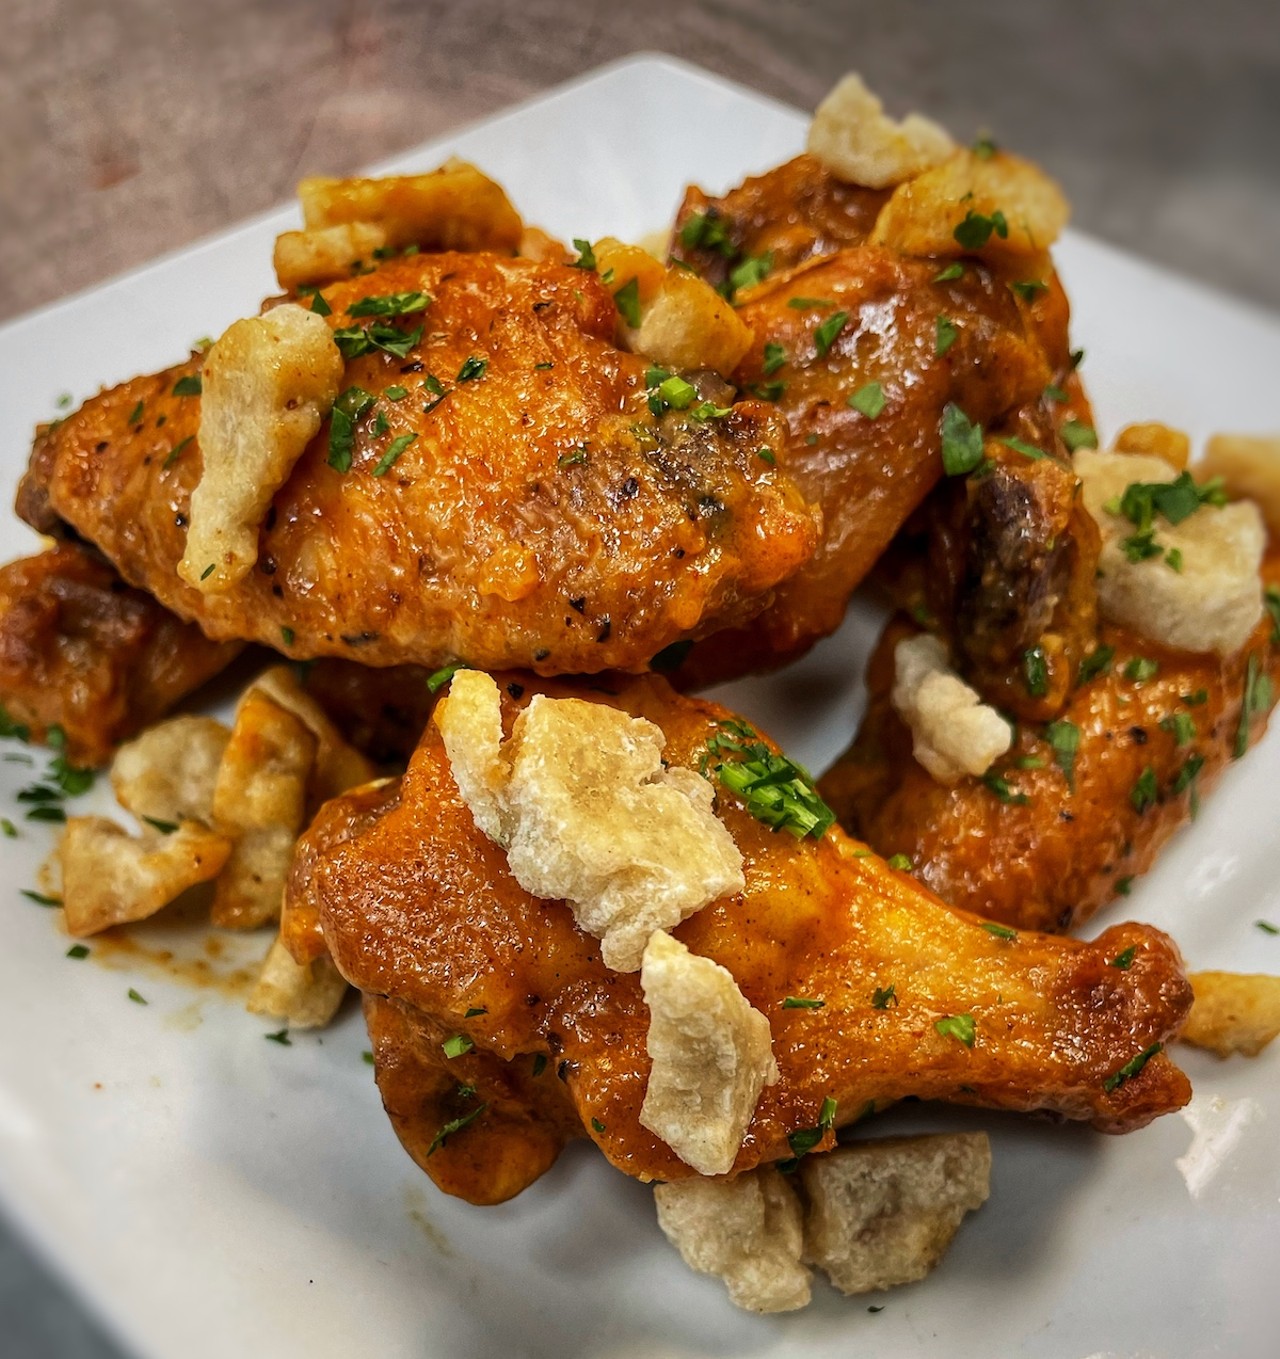  All Saints Public House 
1261 West 76th St., Cleveland 
All Saints Public House will be offering two types of wings for Wing Week; duck wings with habanero orange glaze and chicken paprikash wings. The duck wings are sous vide duck wing drumettes, flash fried until golden brown and crispy, tossed in a house made habanero soy orange glaze and topped with smoked black sesame crispy chicken wings tossed in house made paprikash sauce with sour cream and Hungarian paprika and topped with crispy fried spaetzle.